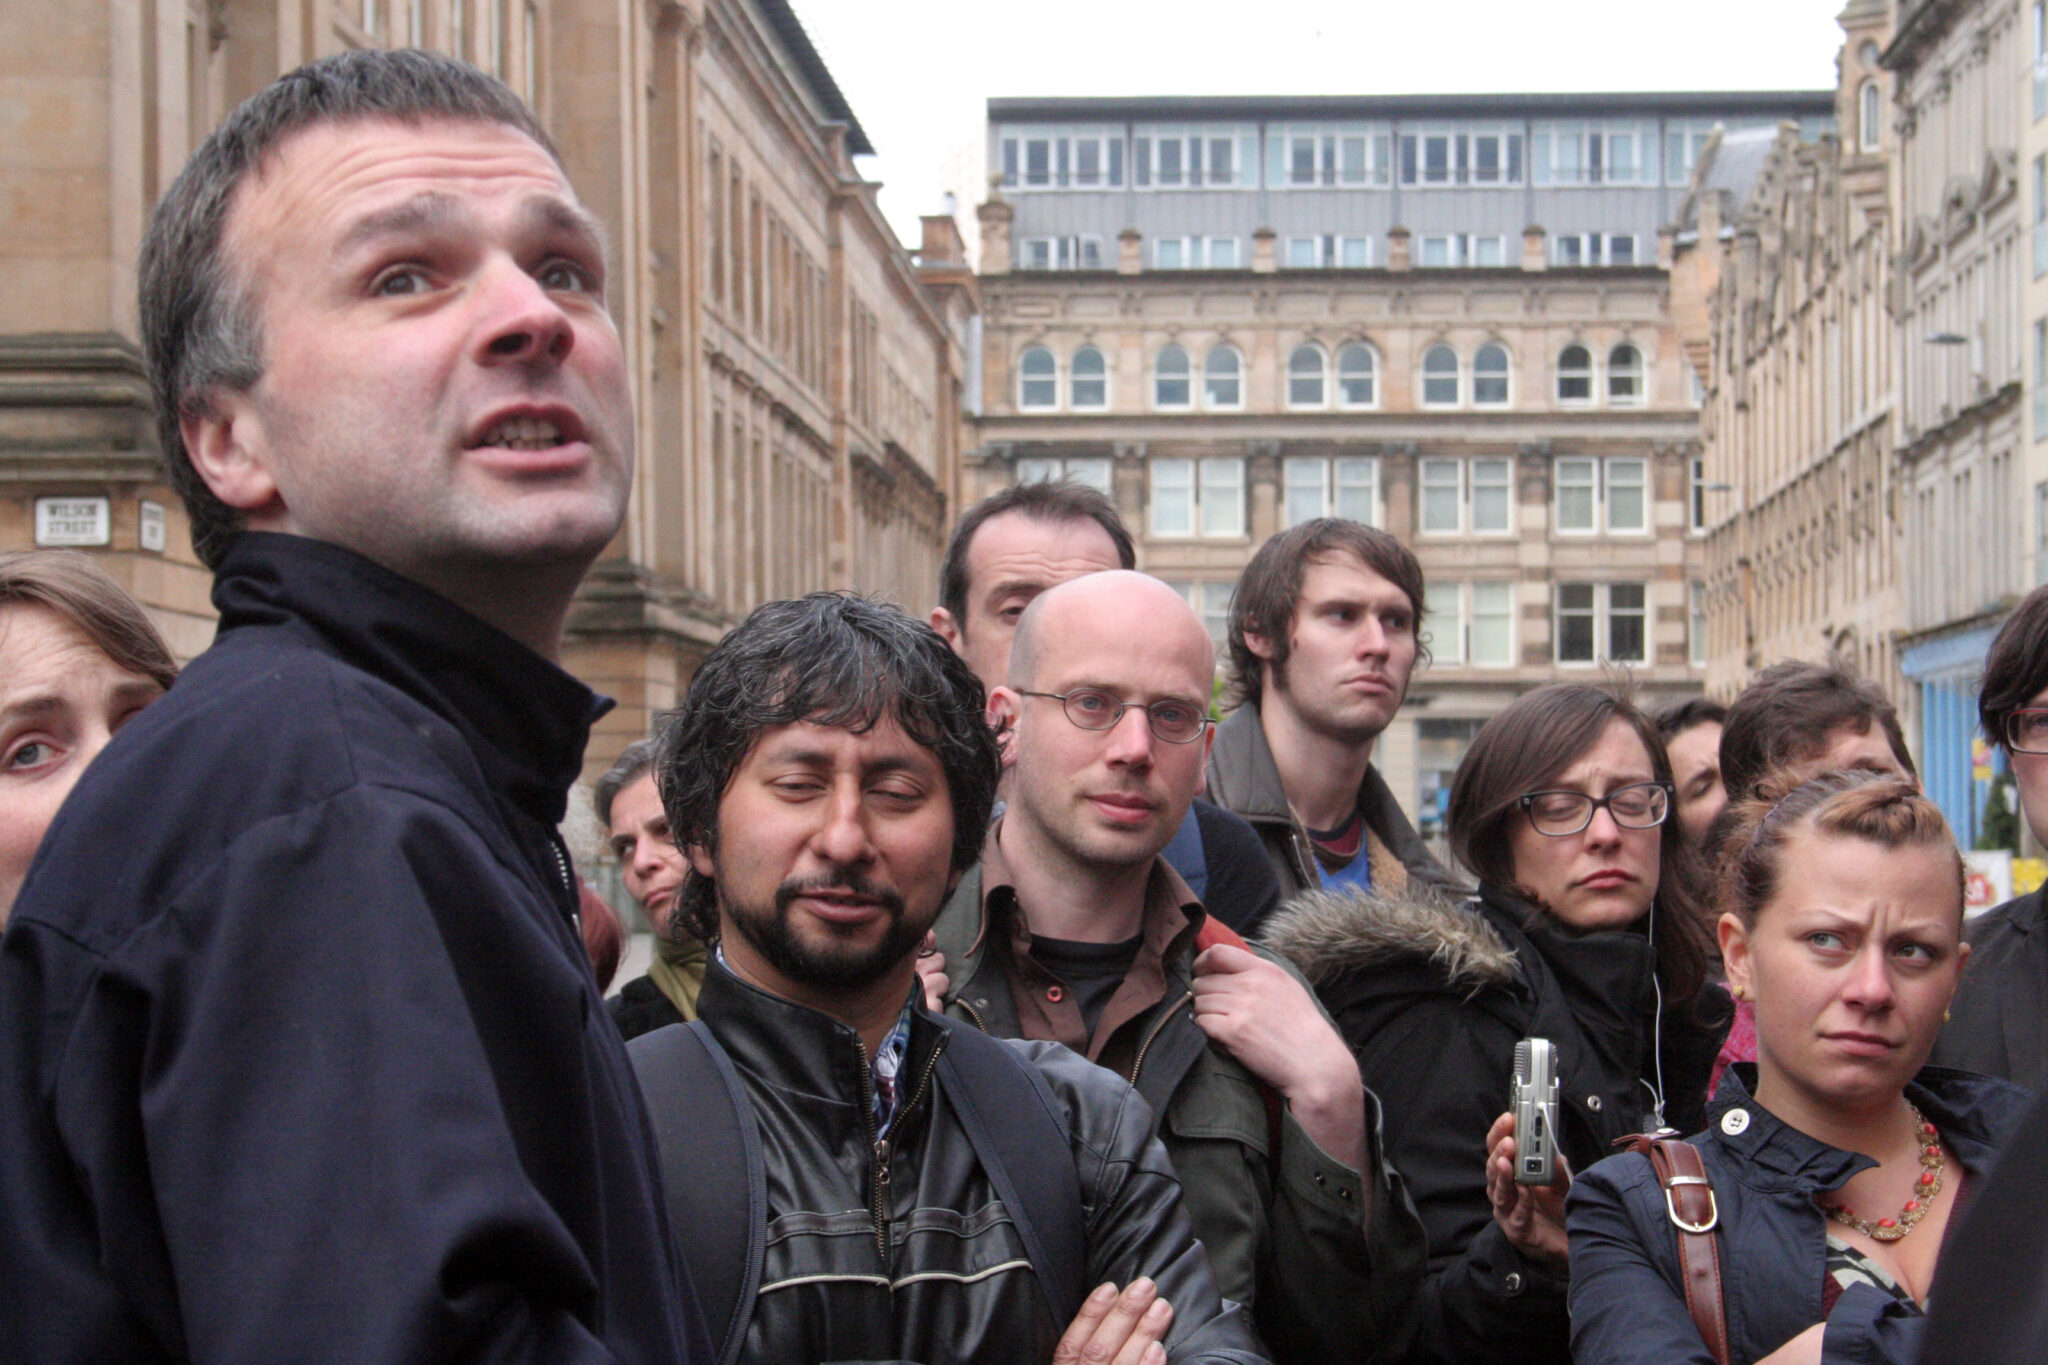 Neil Gray talks about gentrification in Glasgow surrounded by people